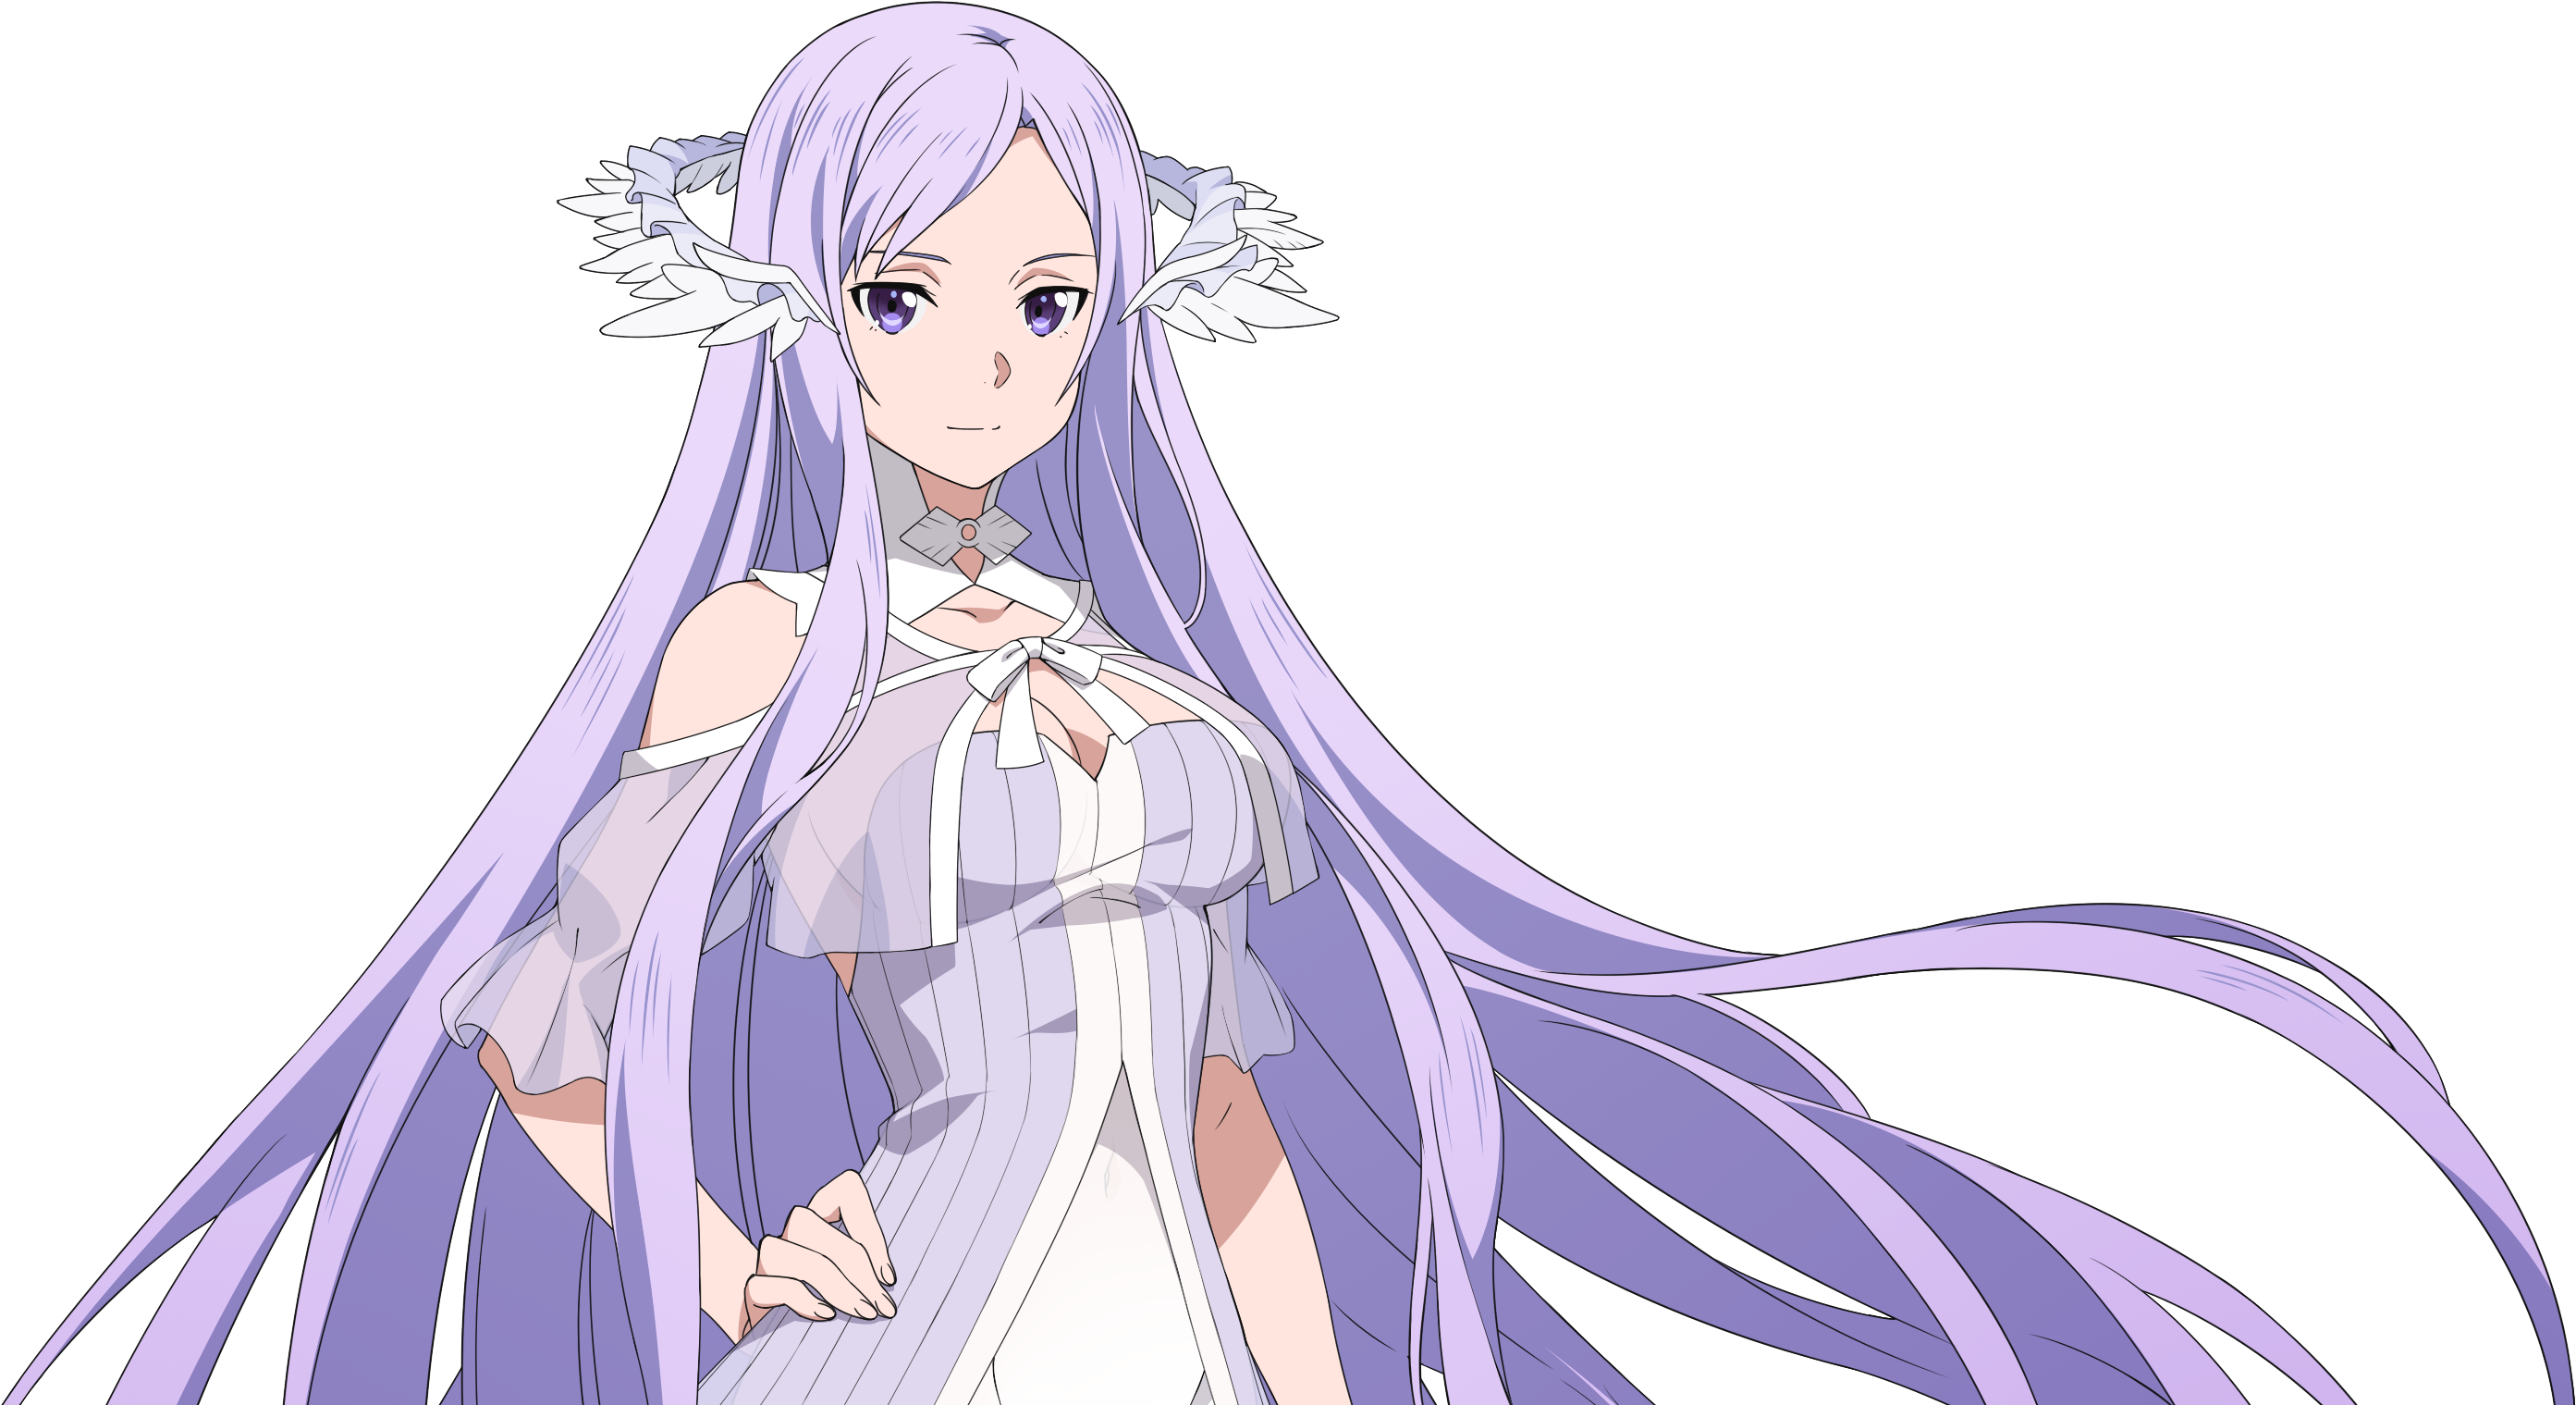 A Cartoon Of A Woman With Long Purple Hair PNG